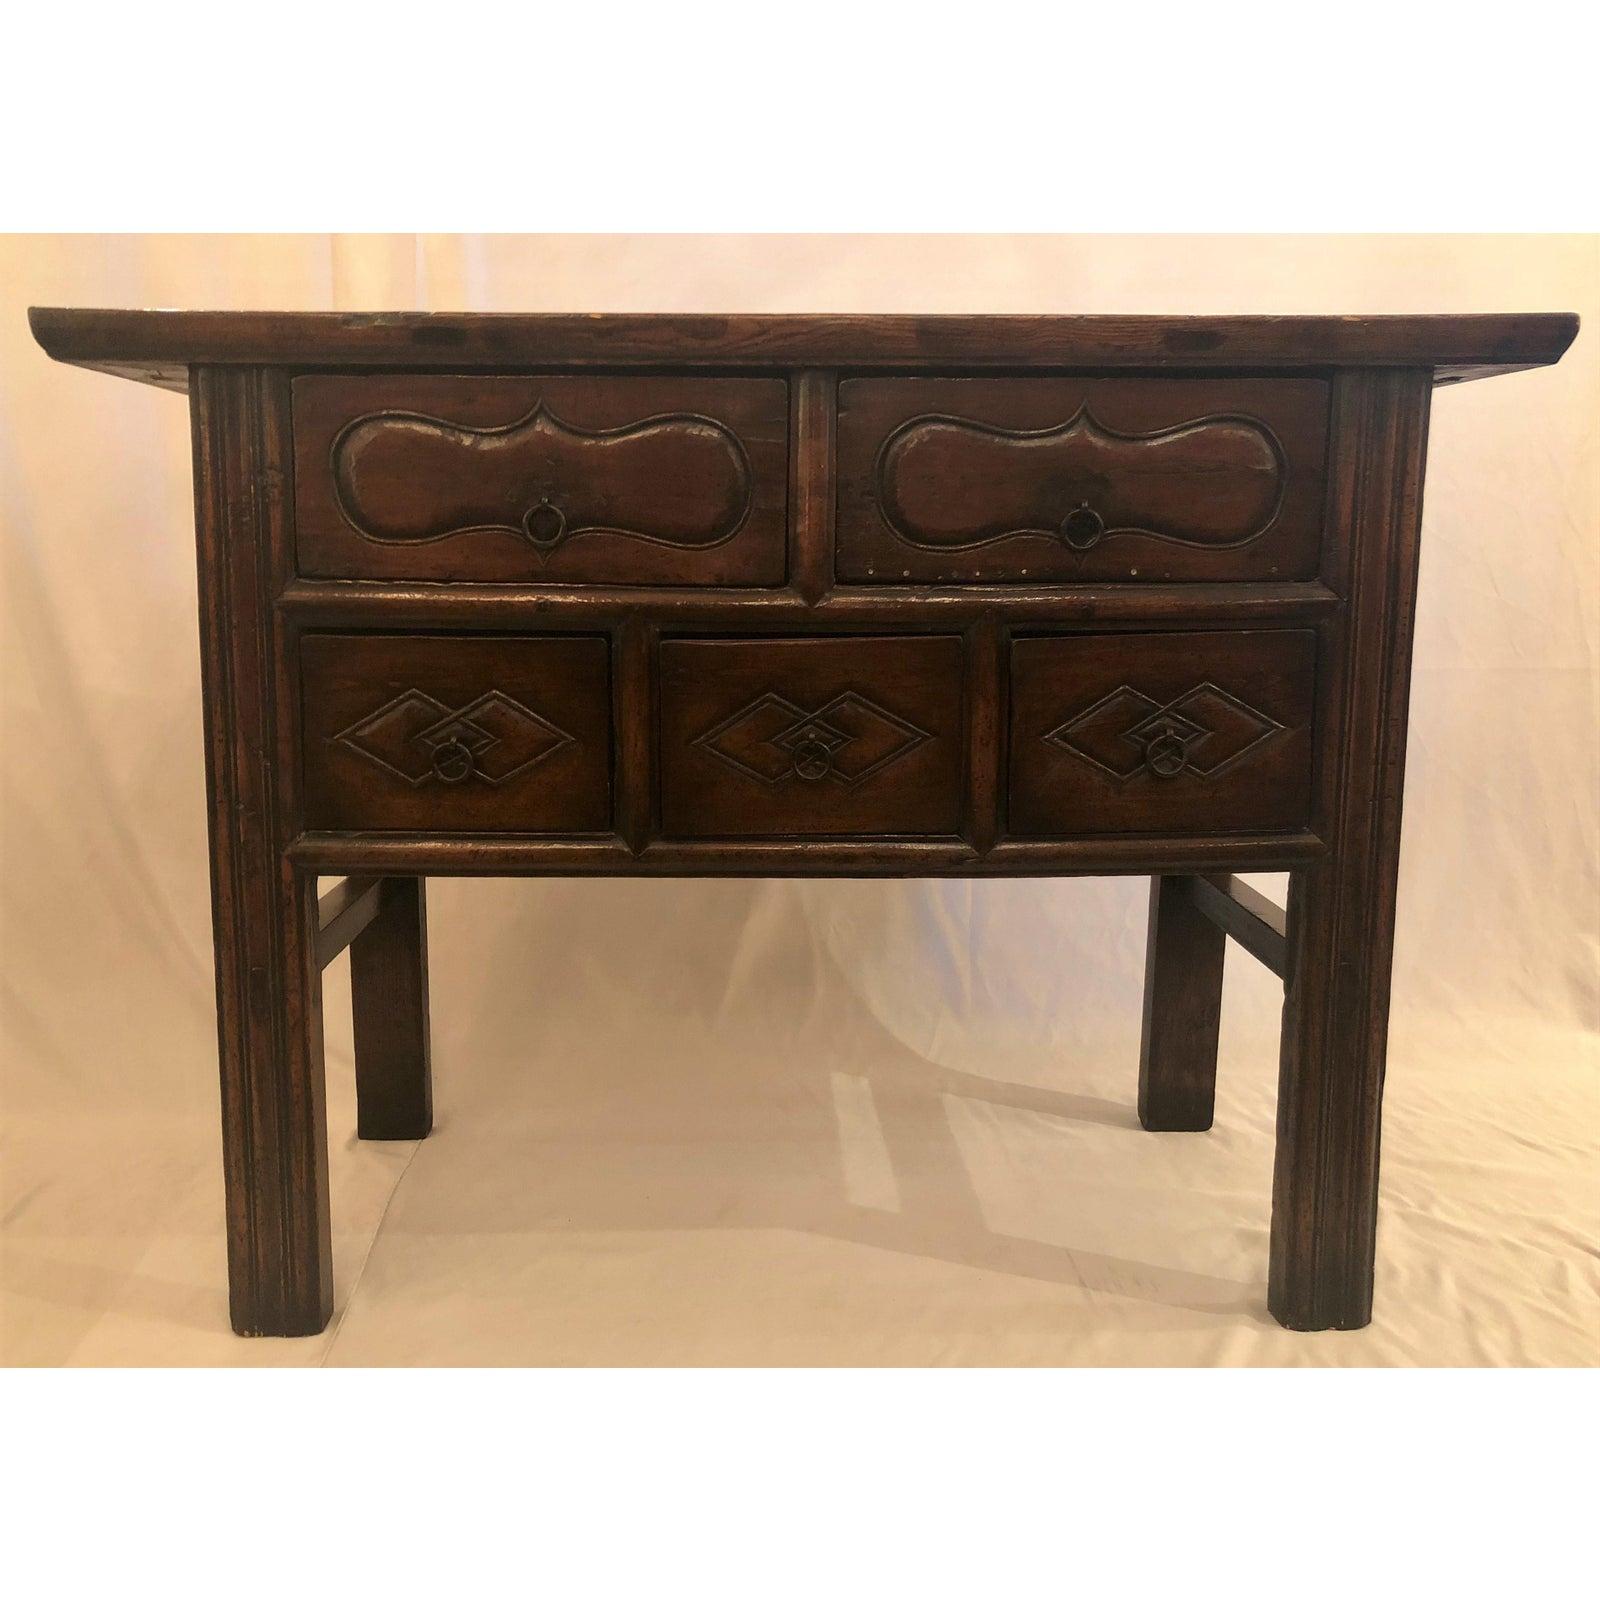 Antique 19th century Chinese altar table.
AOT001.